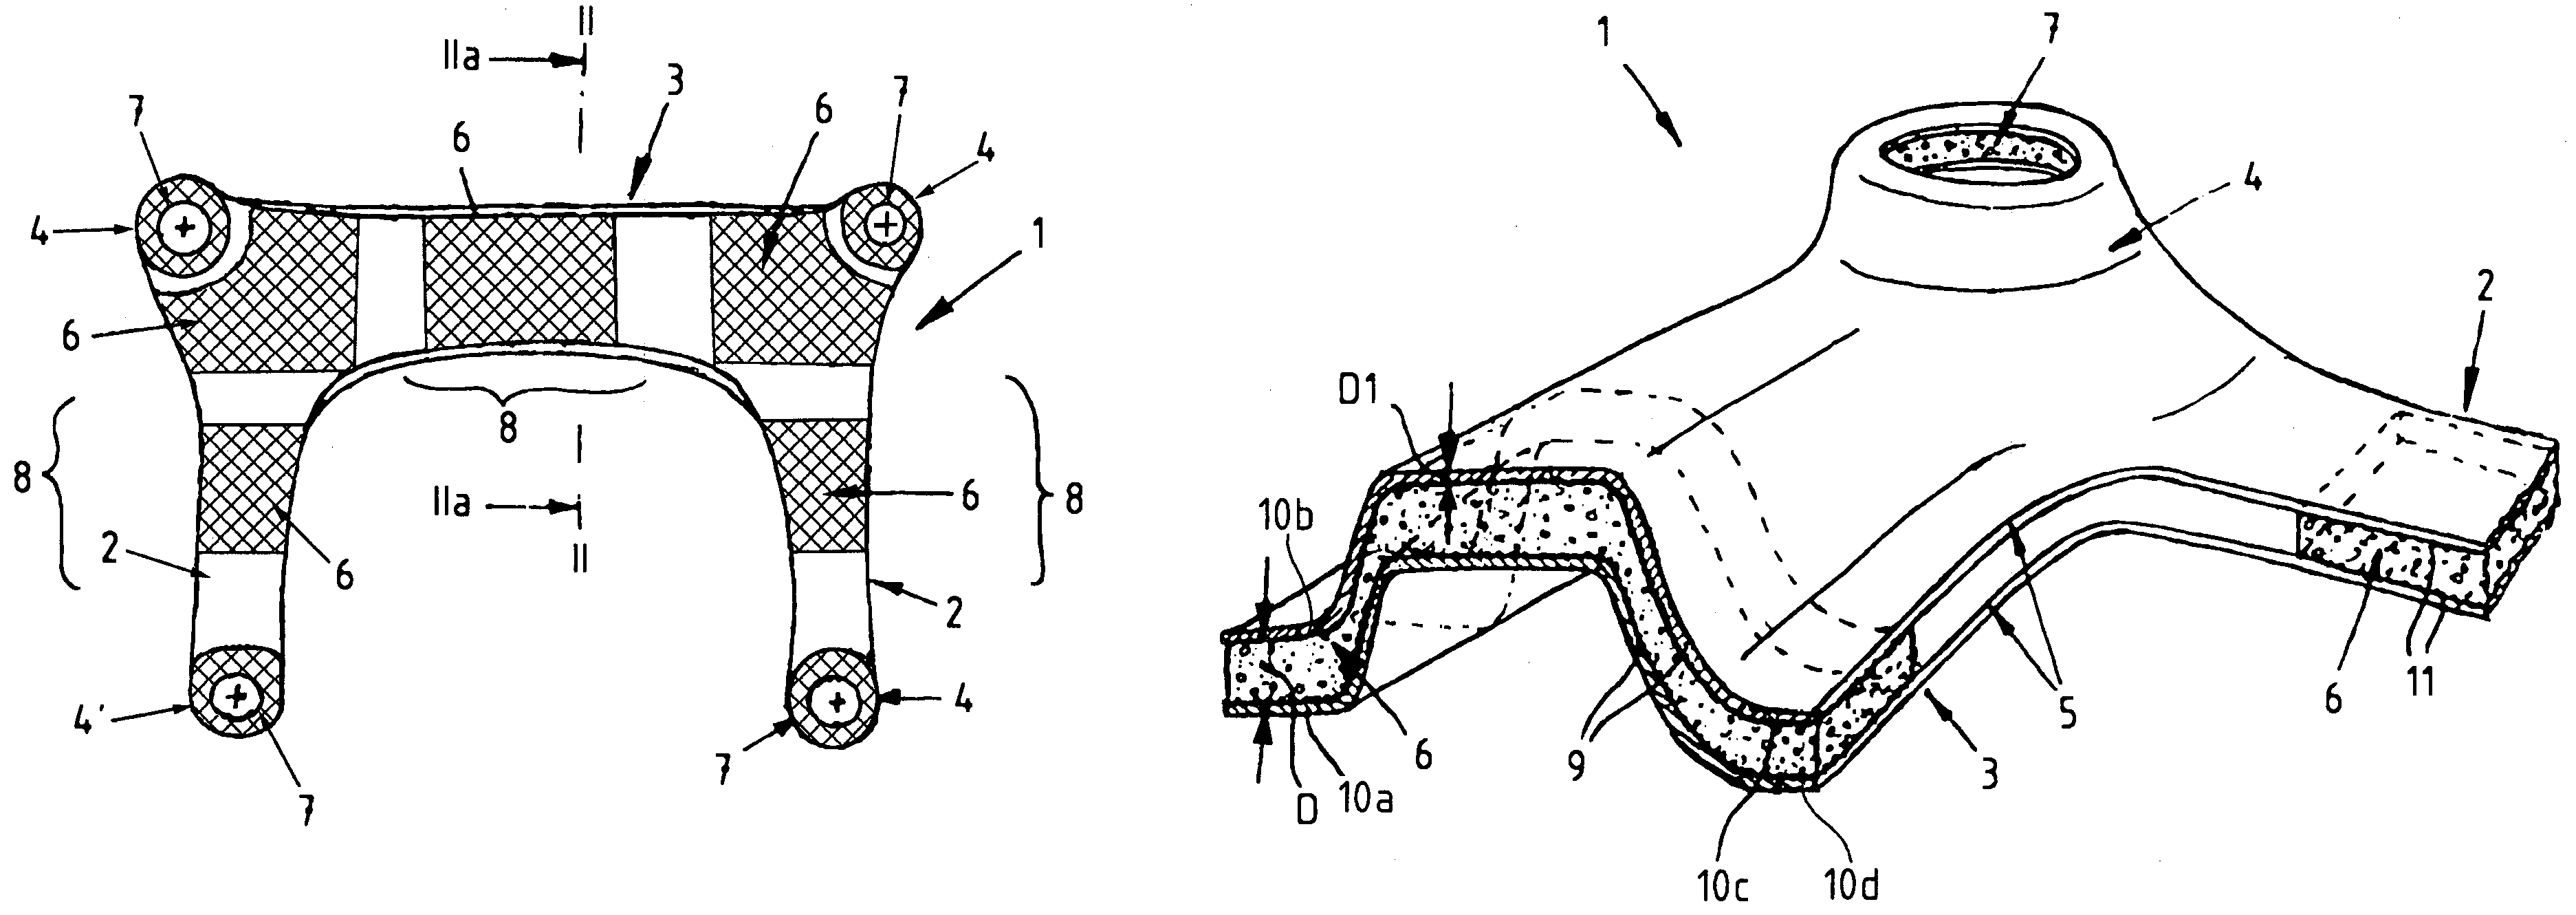 Axle structure for a motor vehicle